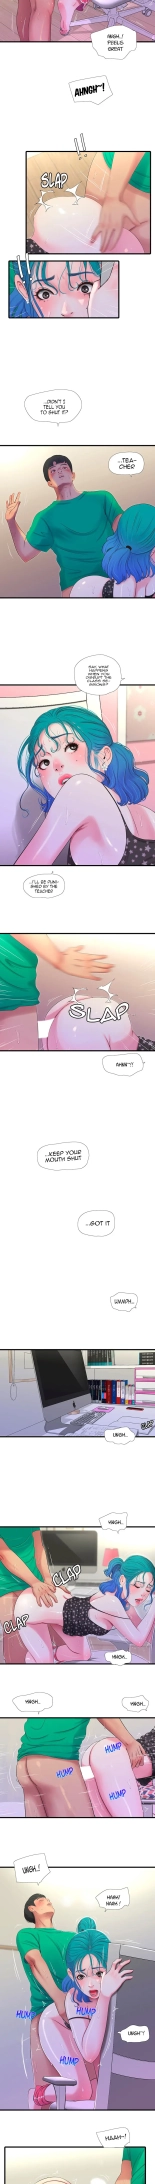 One's In-Laws Virgins Ch. 26-30 : page 15